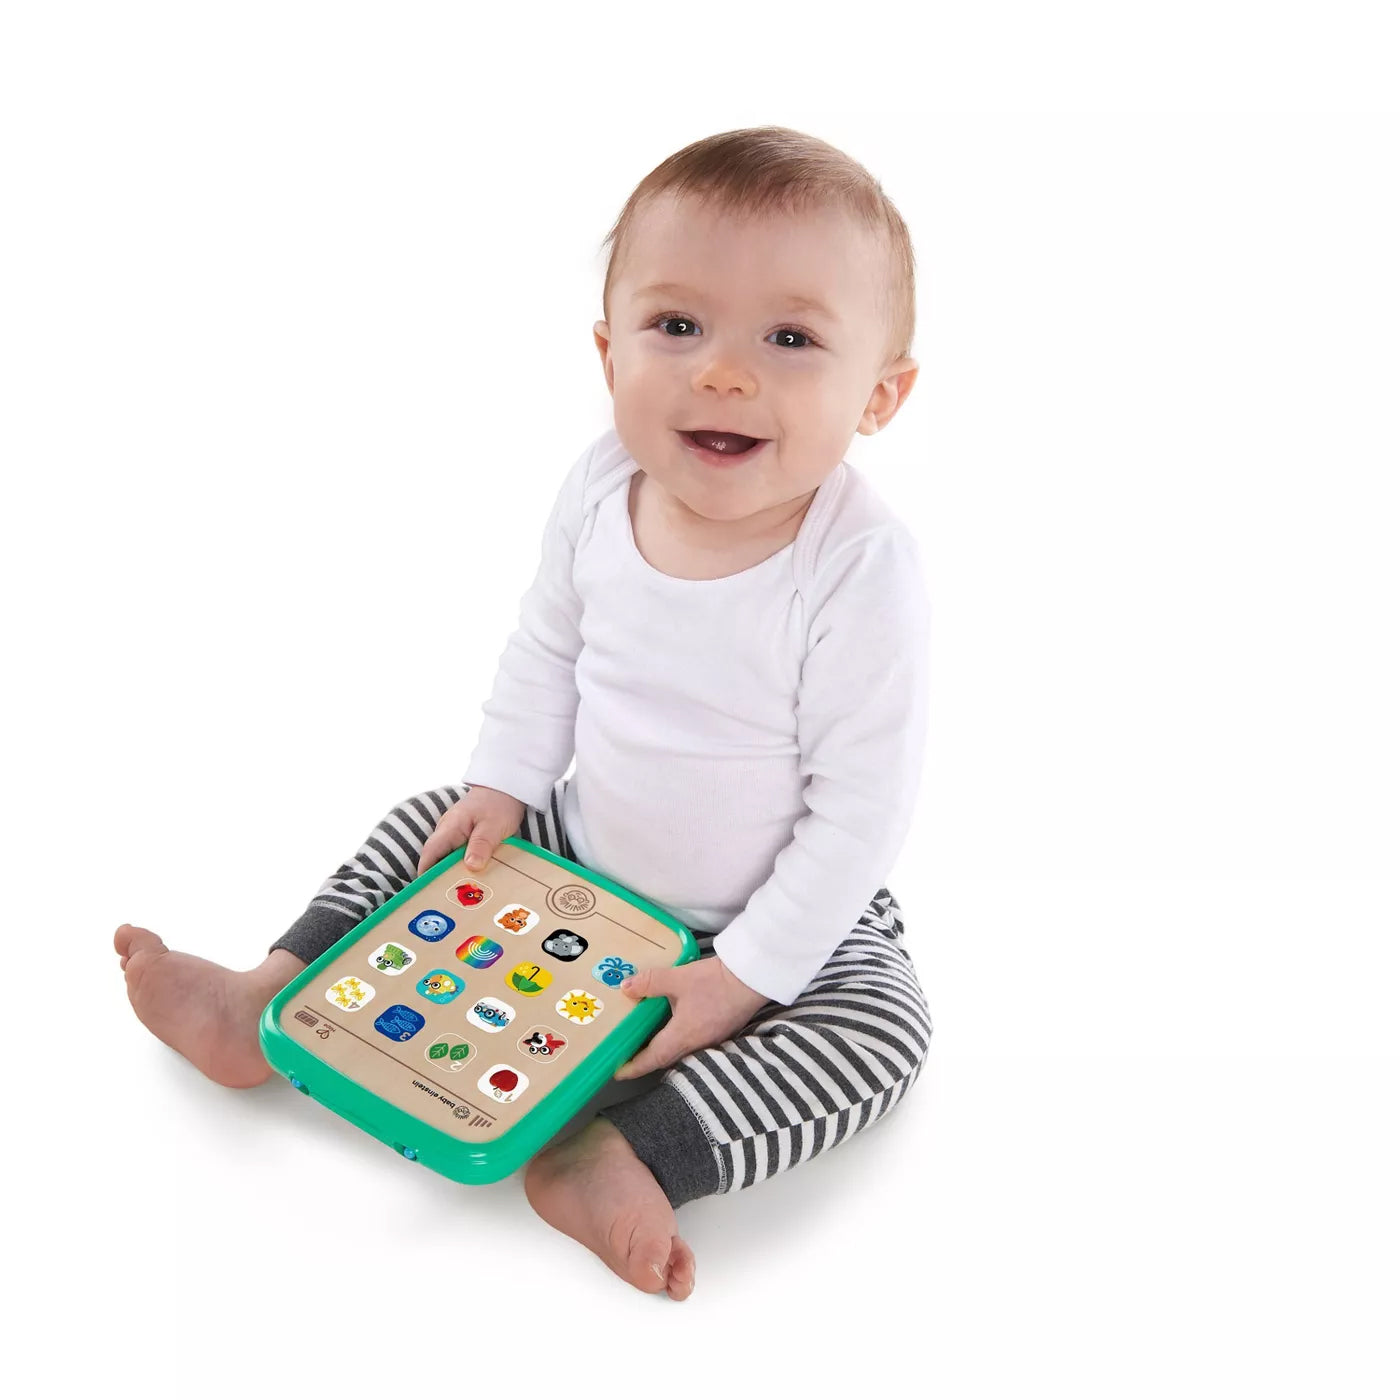 Baby Einstein Hape Magic Touch Curiosity Tablet educational wooden toy The Toy Wagon